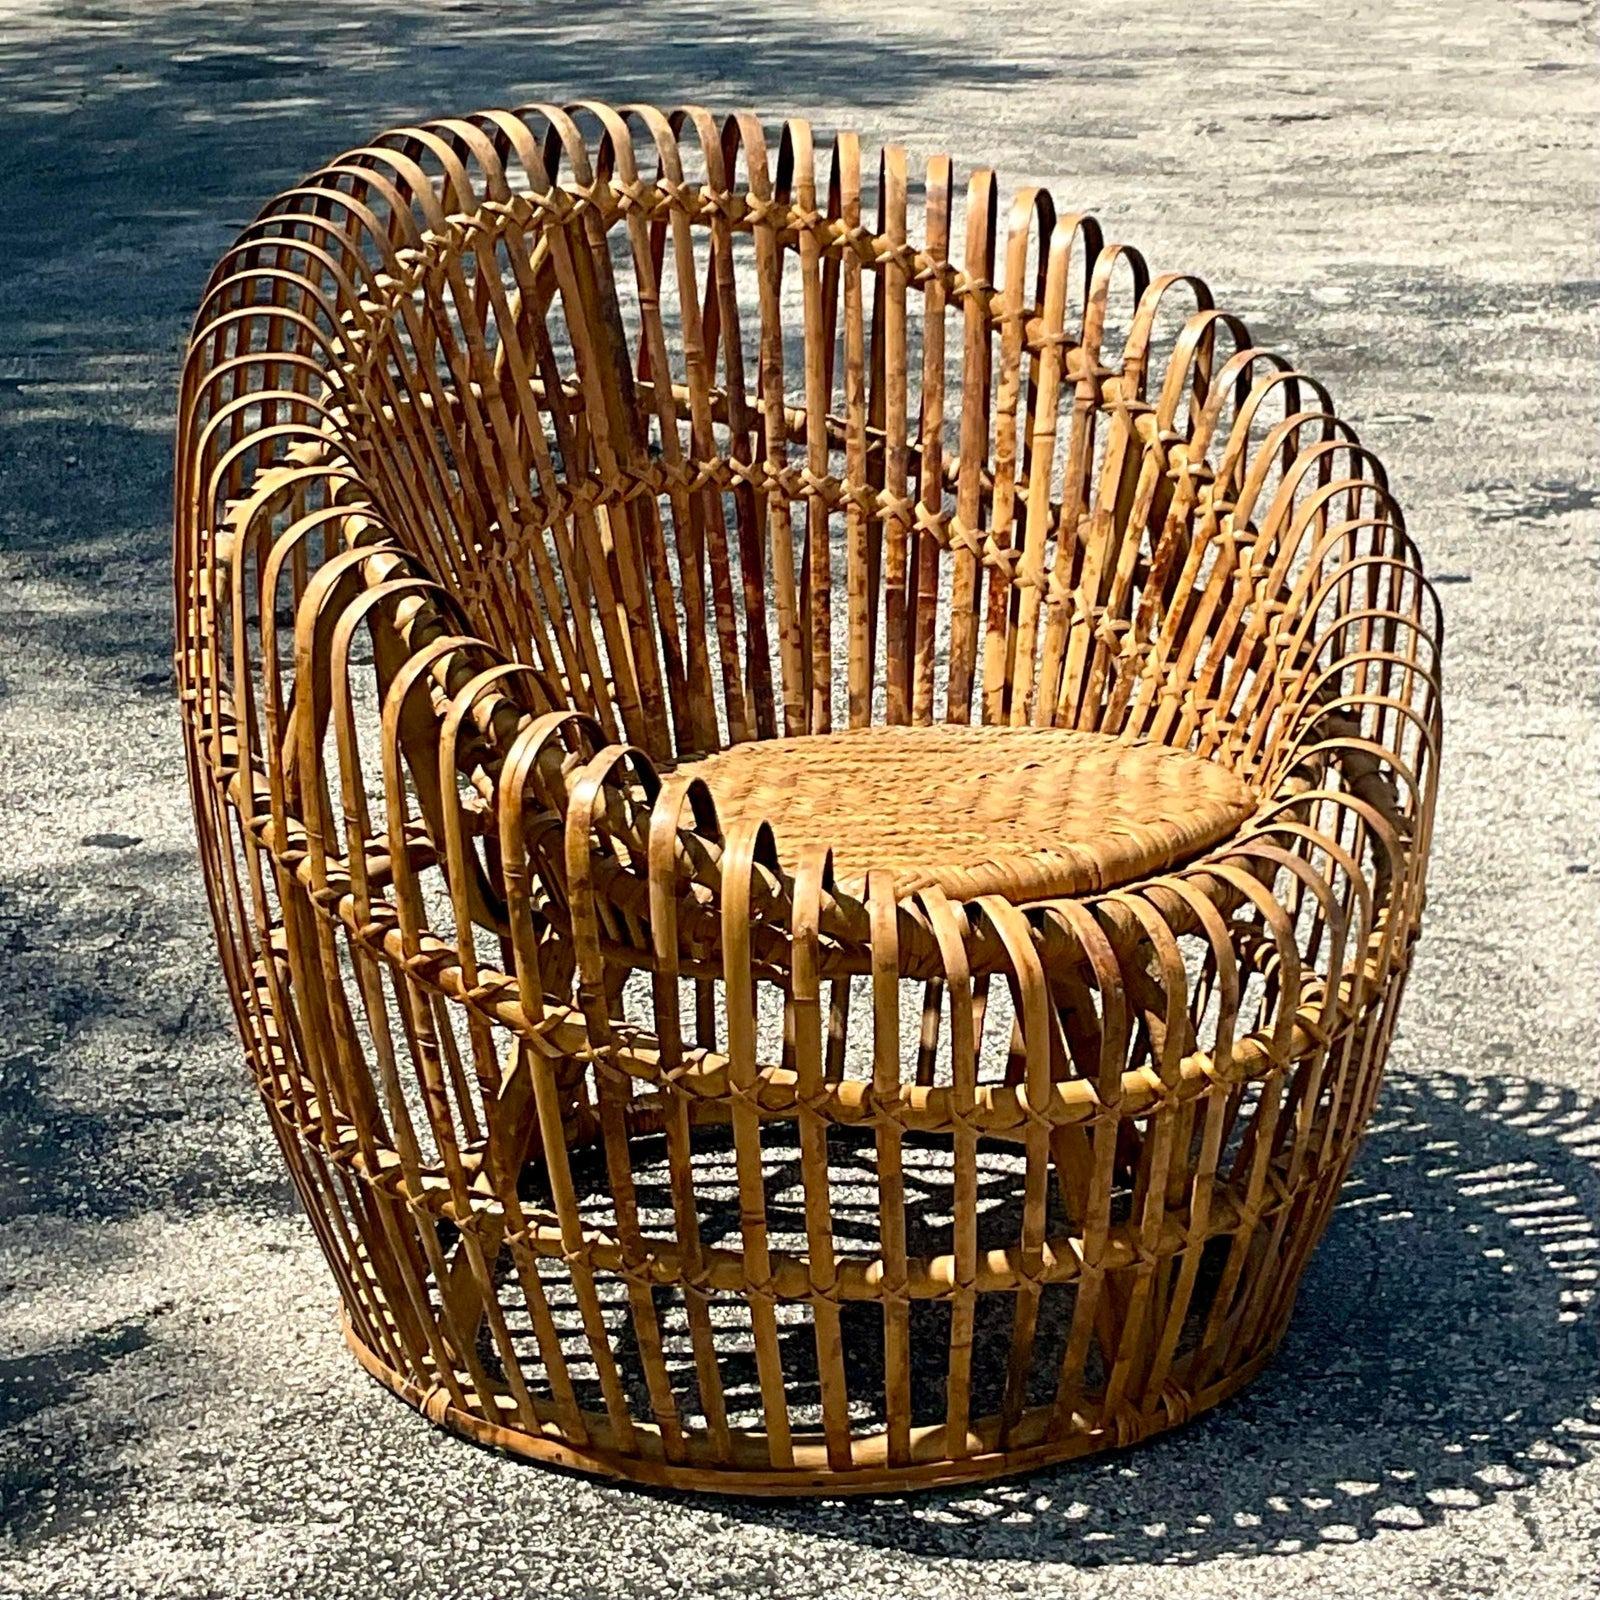 A spectacular vintage Italian pod chair. Chic slatted bamboo with an inset woven rattan seat. Gorgeous patina from time. Acquired from a Palm Beach estate.